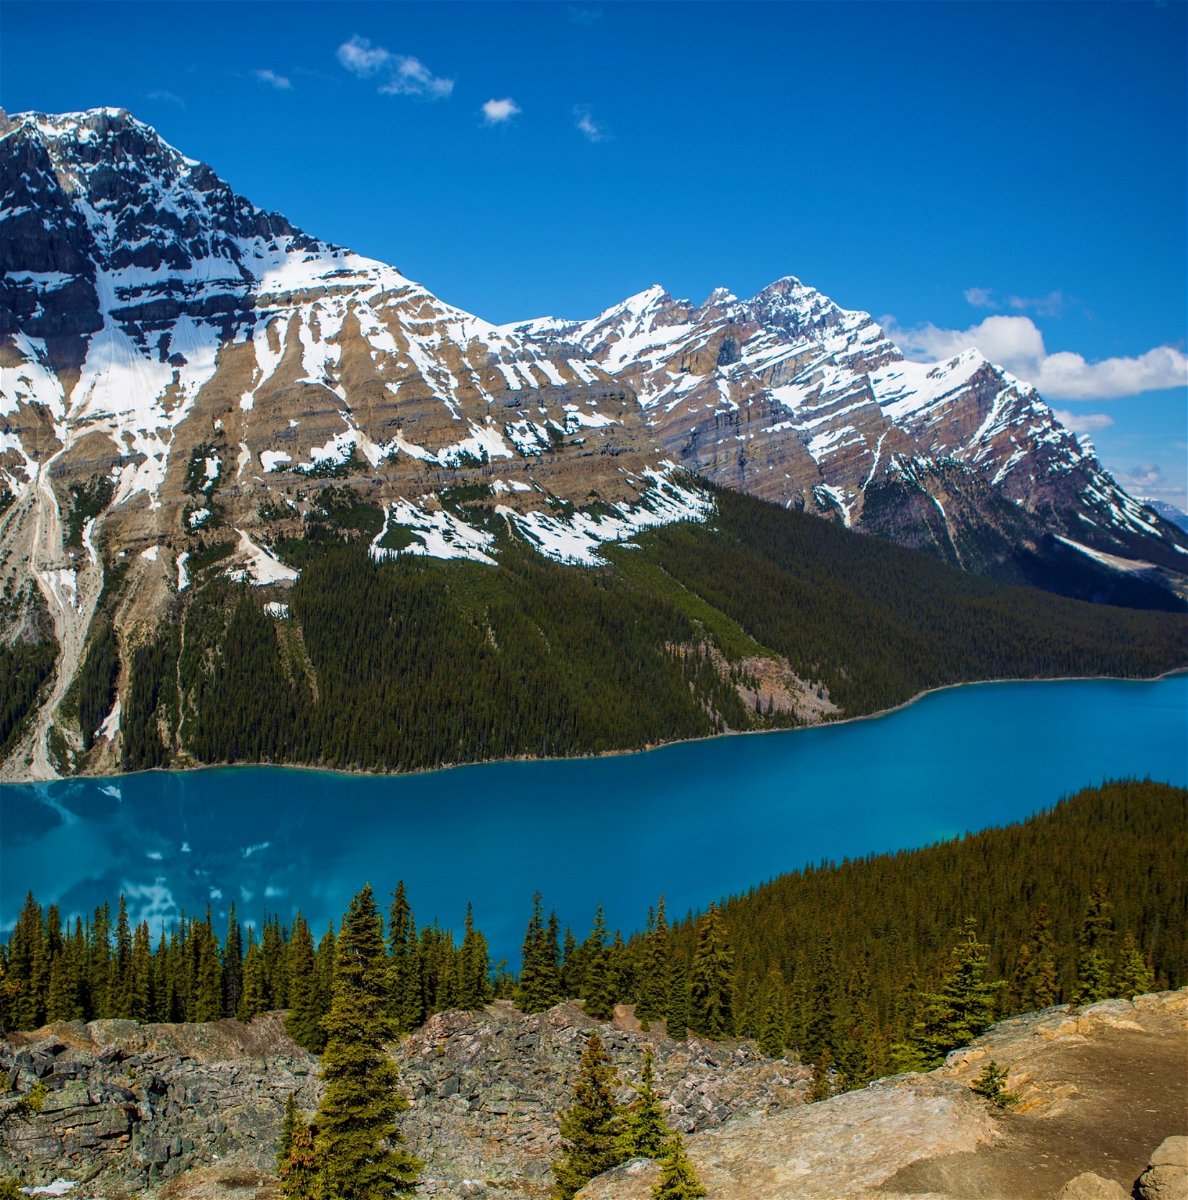 Explore some of Canada's best national parks